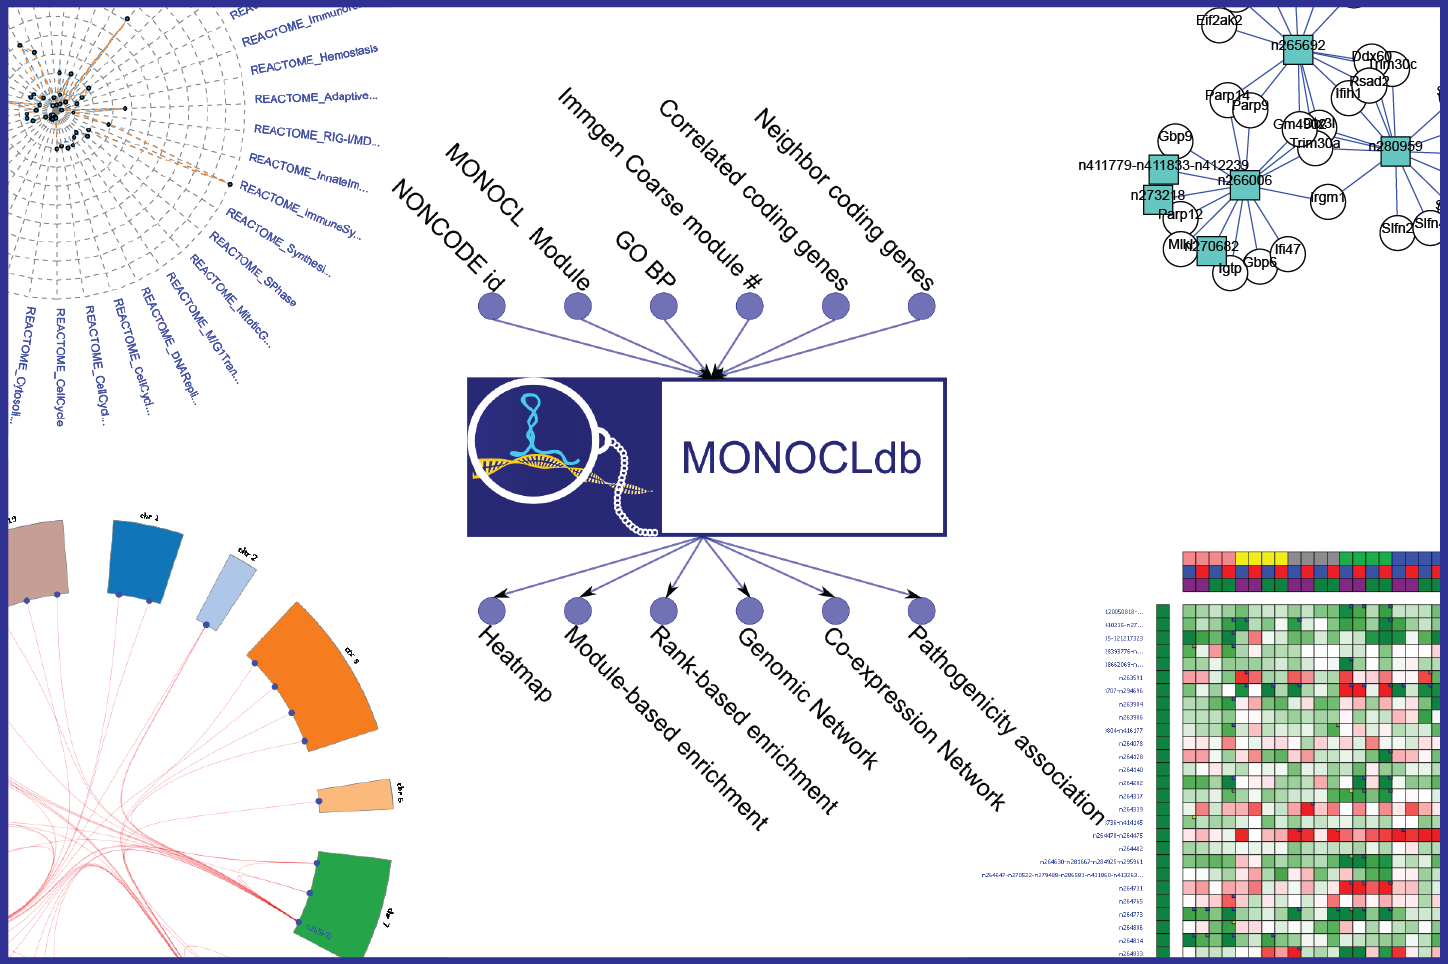 MONOCLdb: is an integrative and interactive database designed to retrieve and visualize annotations, expression profiles and functional enrichment results of long-non coding RNAs (lncRNAs) expressed in Collaborative Cross founder mice in response to respiratory infections caused by influenza and SARS-CoV viruses